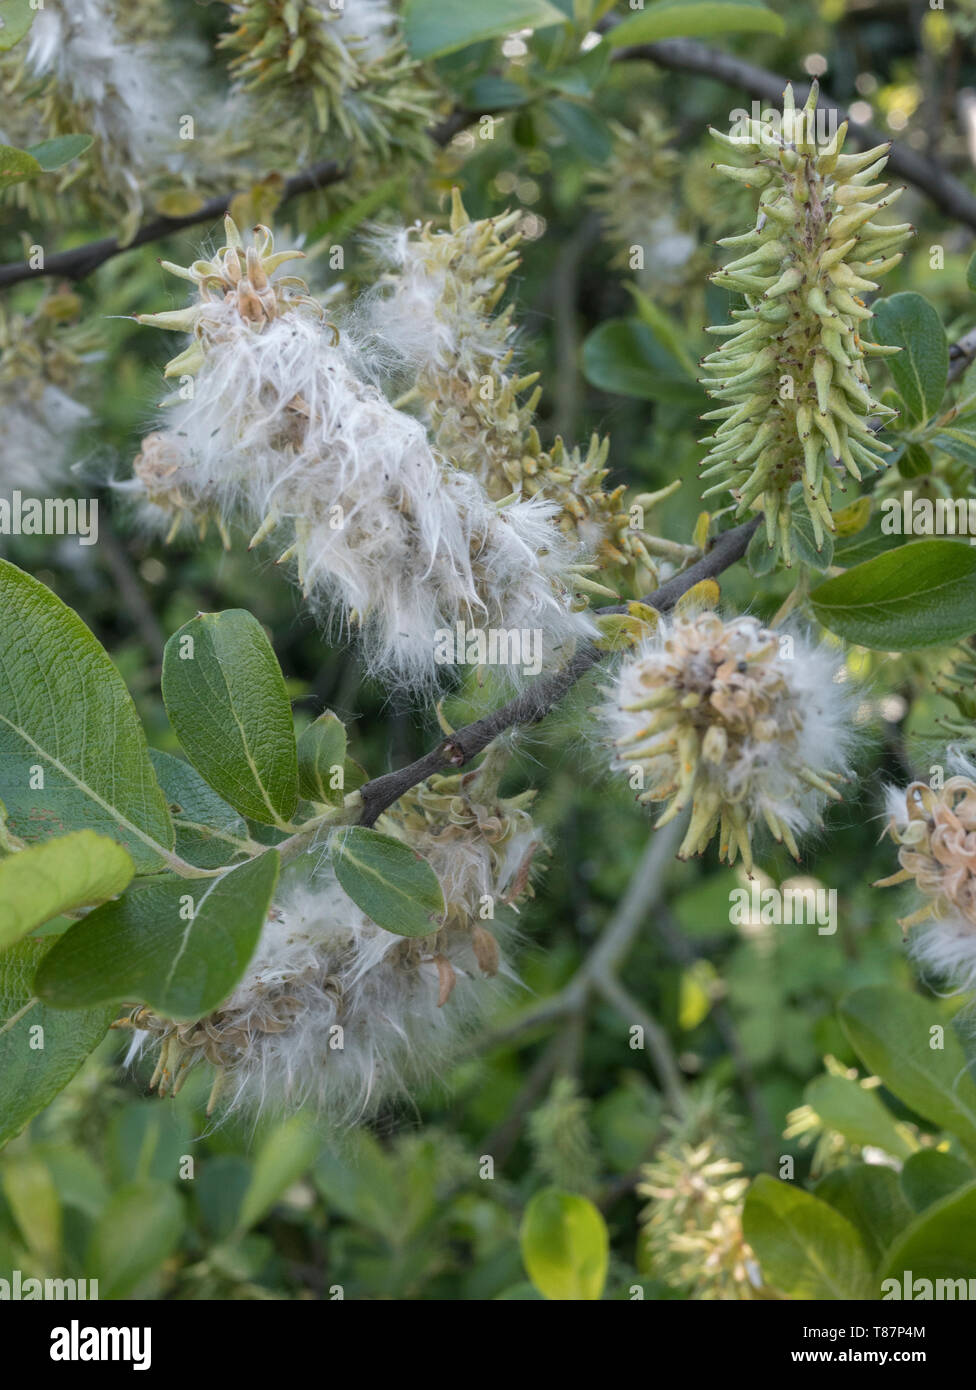 Fluffy female catkins of Goat Willow / Salix caprea which favours damp ground habitats. Medicinal Willow species once used in herbal remedies. Stock Photo